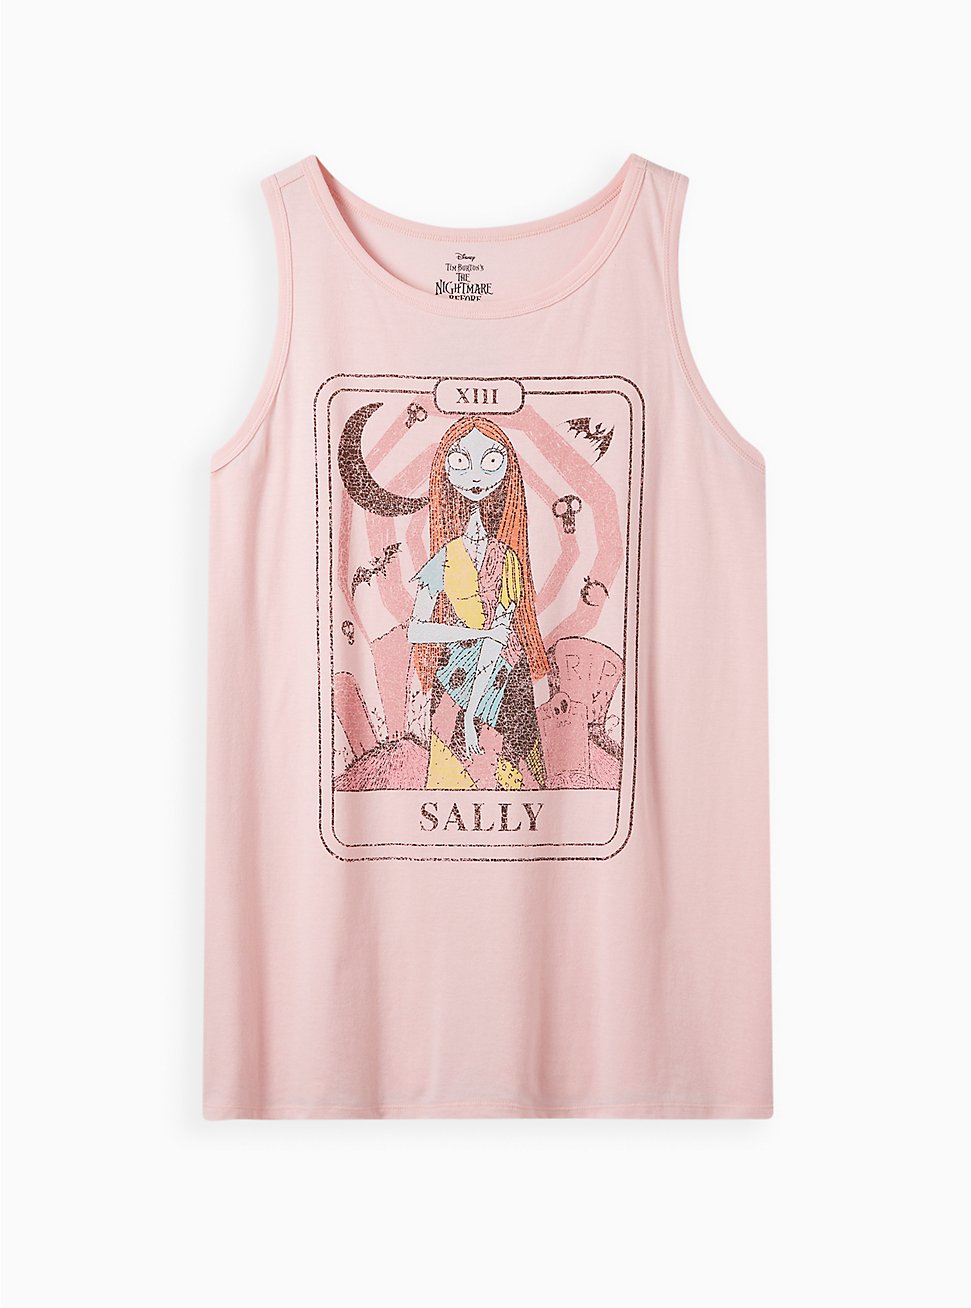 Plus Size Disney The Nightmare Before Christmas Classic Fit Crew Tank - Cotton Sally Pink, PINK, hi-res